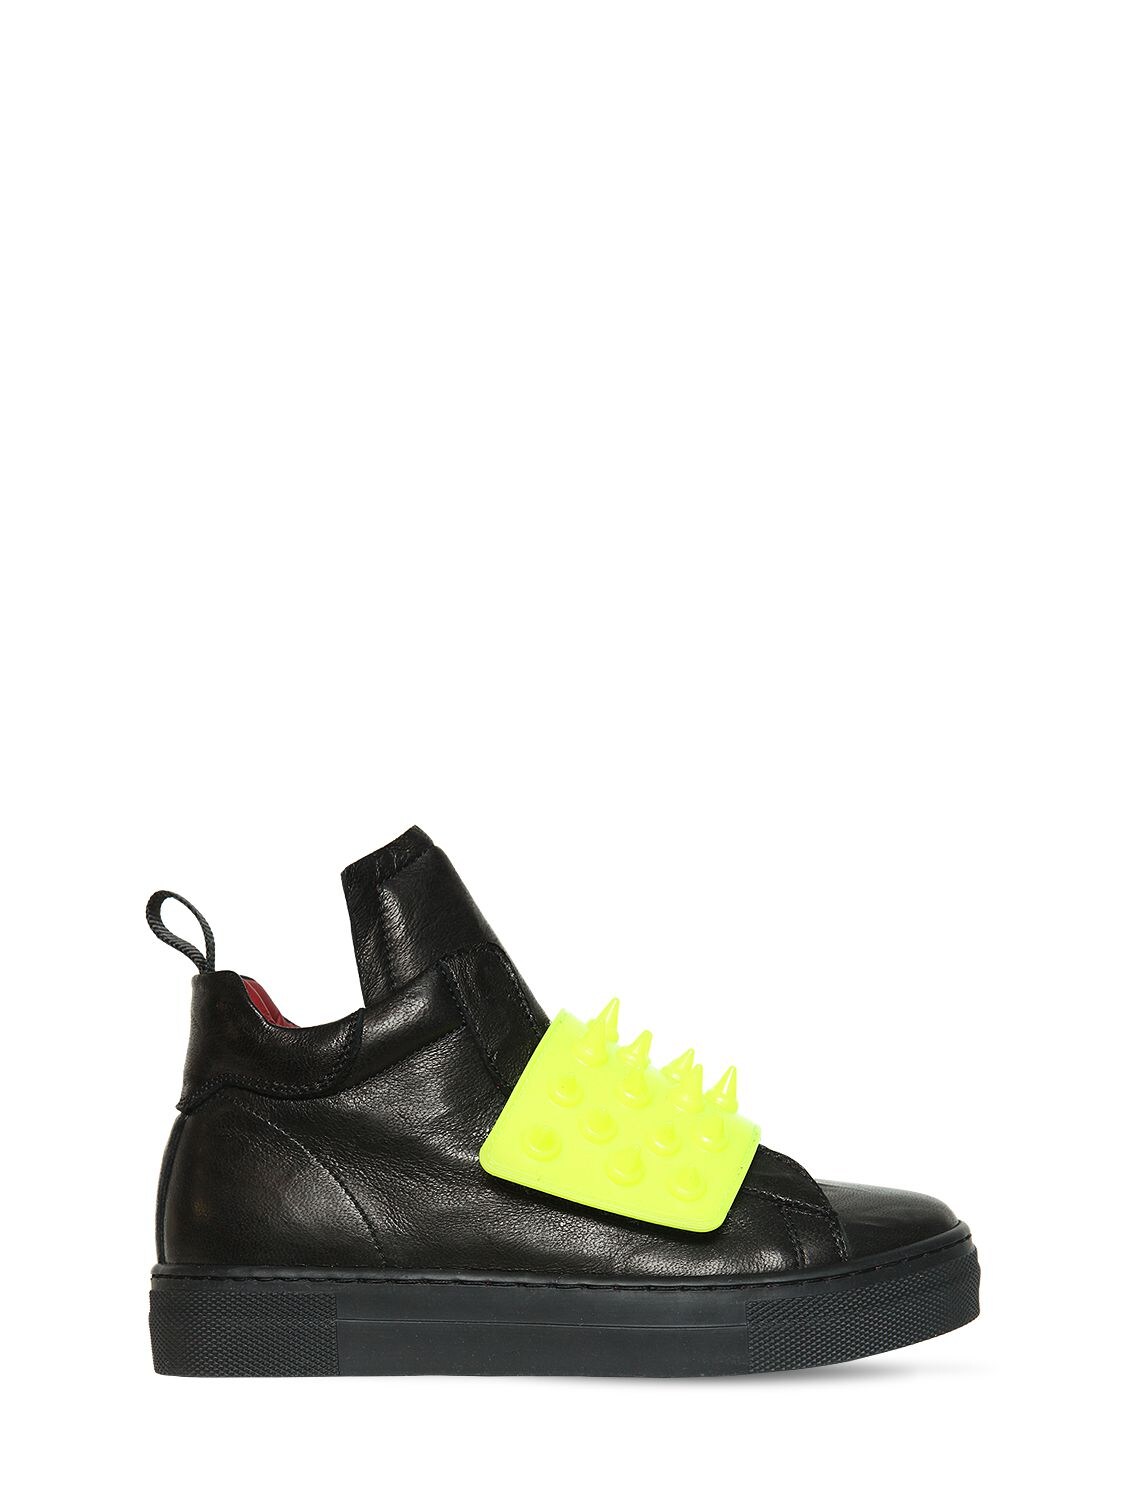 Am 66 Kids' Spiked Leather High Top Sneakers In Black,yellow